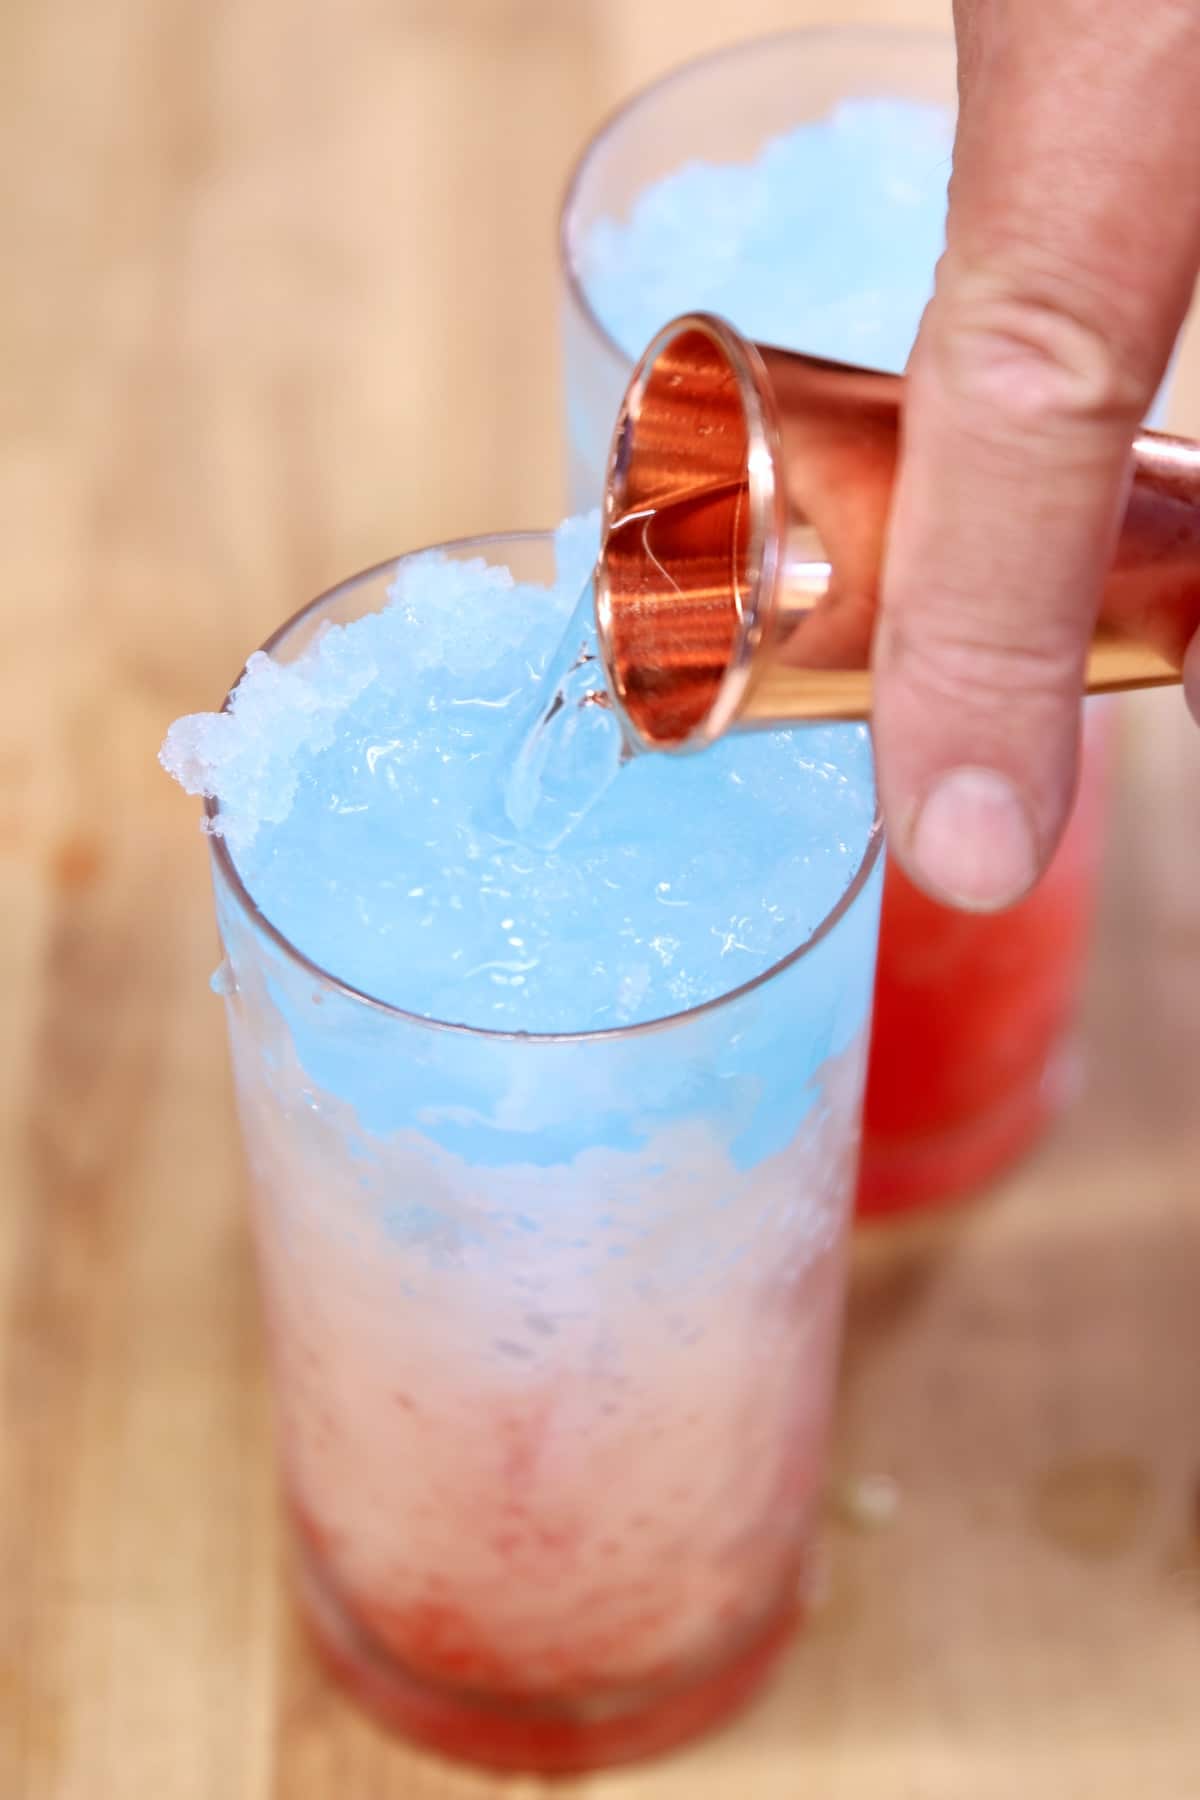 Pouring rum into a layered slush drink.